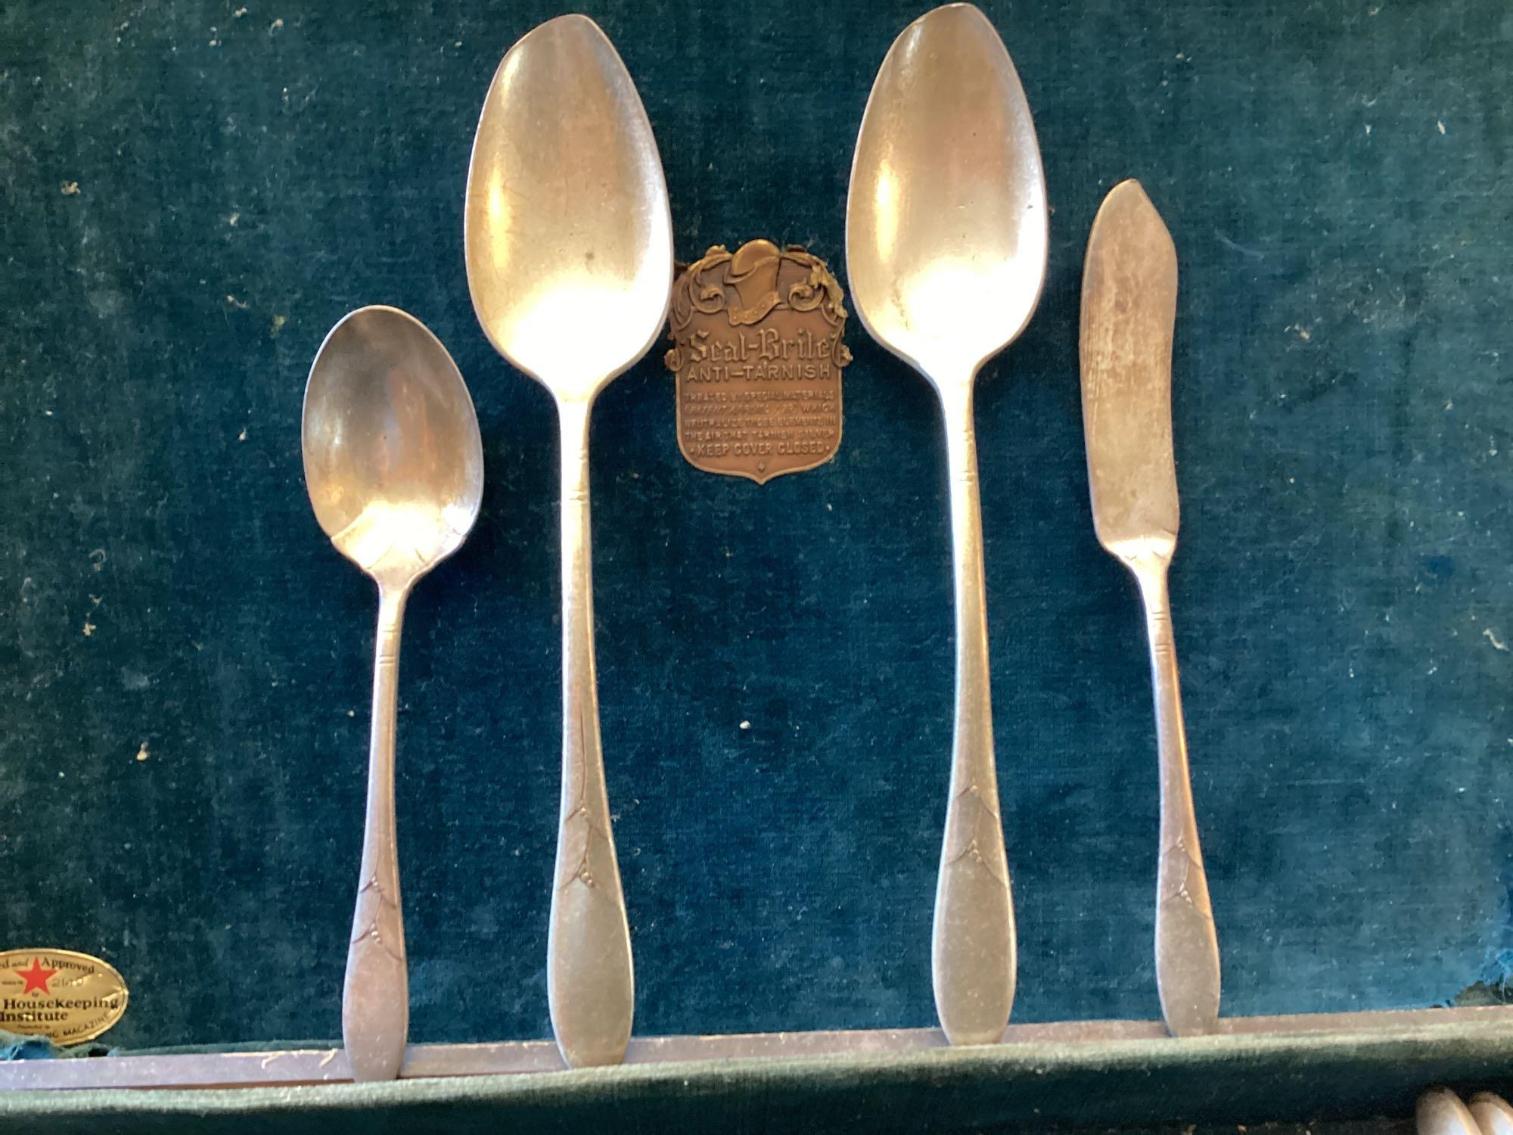 Image for Community Silver Plated Flatware